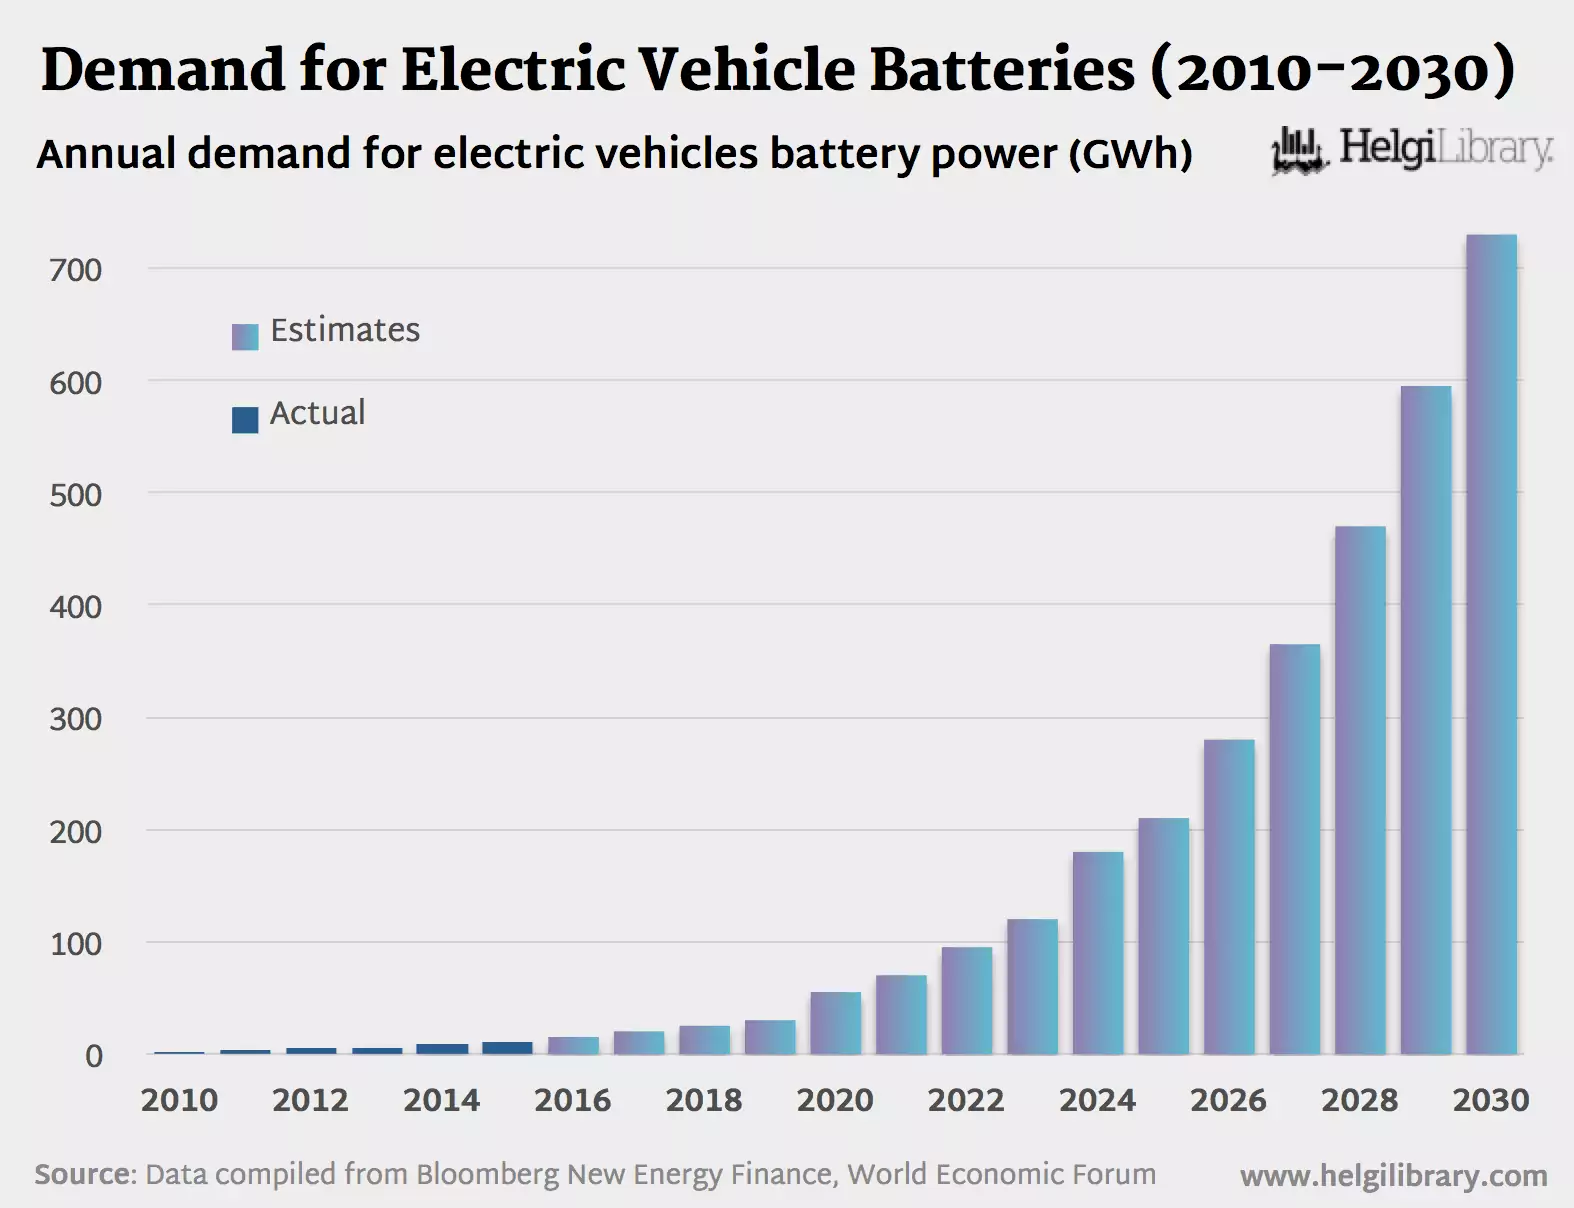 Bar chart: Upward trend in demand for electric vehicle batteries between 2010 and 2030